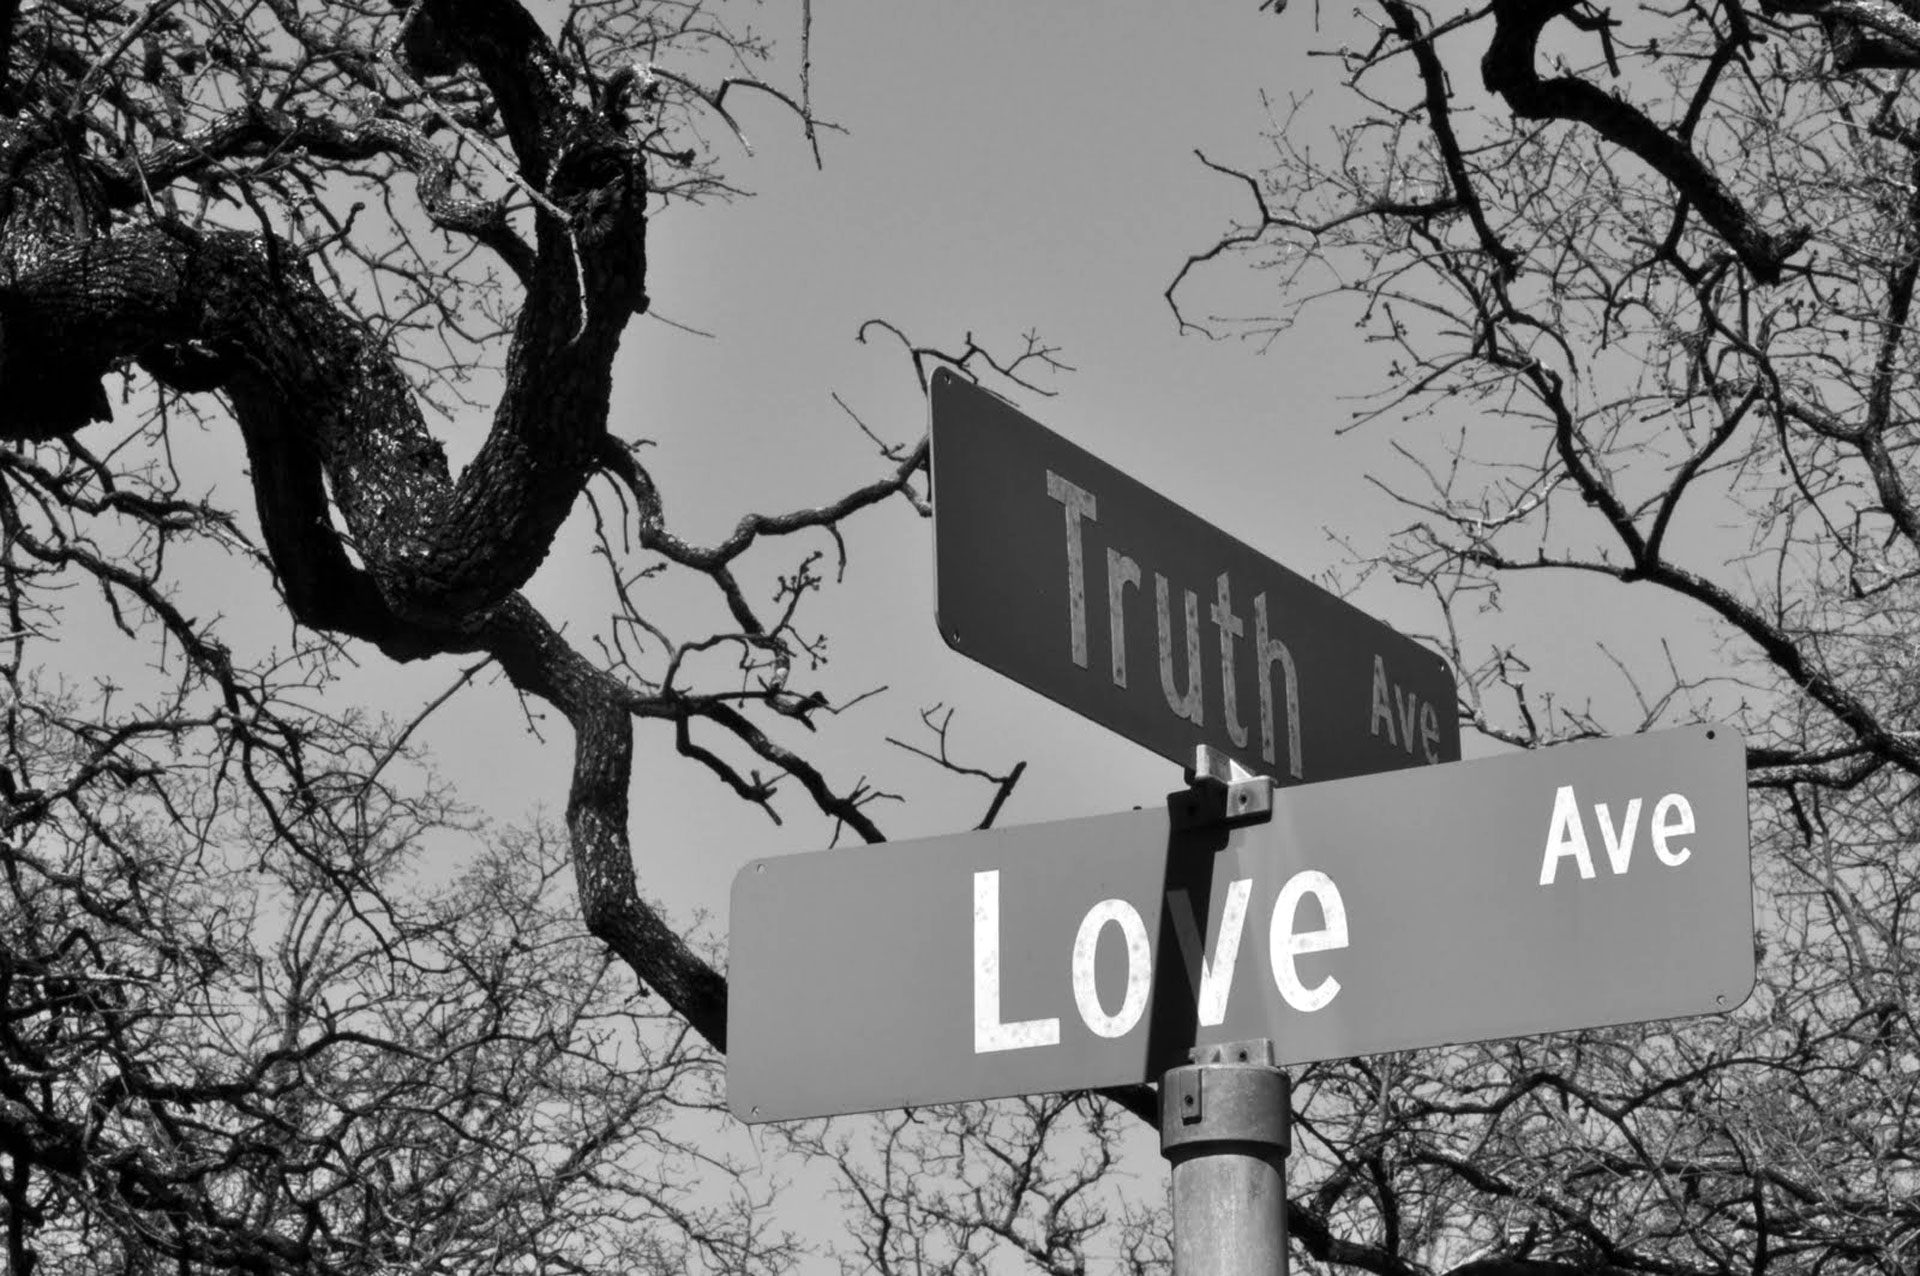 She tell me the truth. Truth красивая картинка. The Truth Love. The true Truth. The Truth and God are with us картинки.